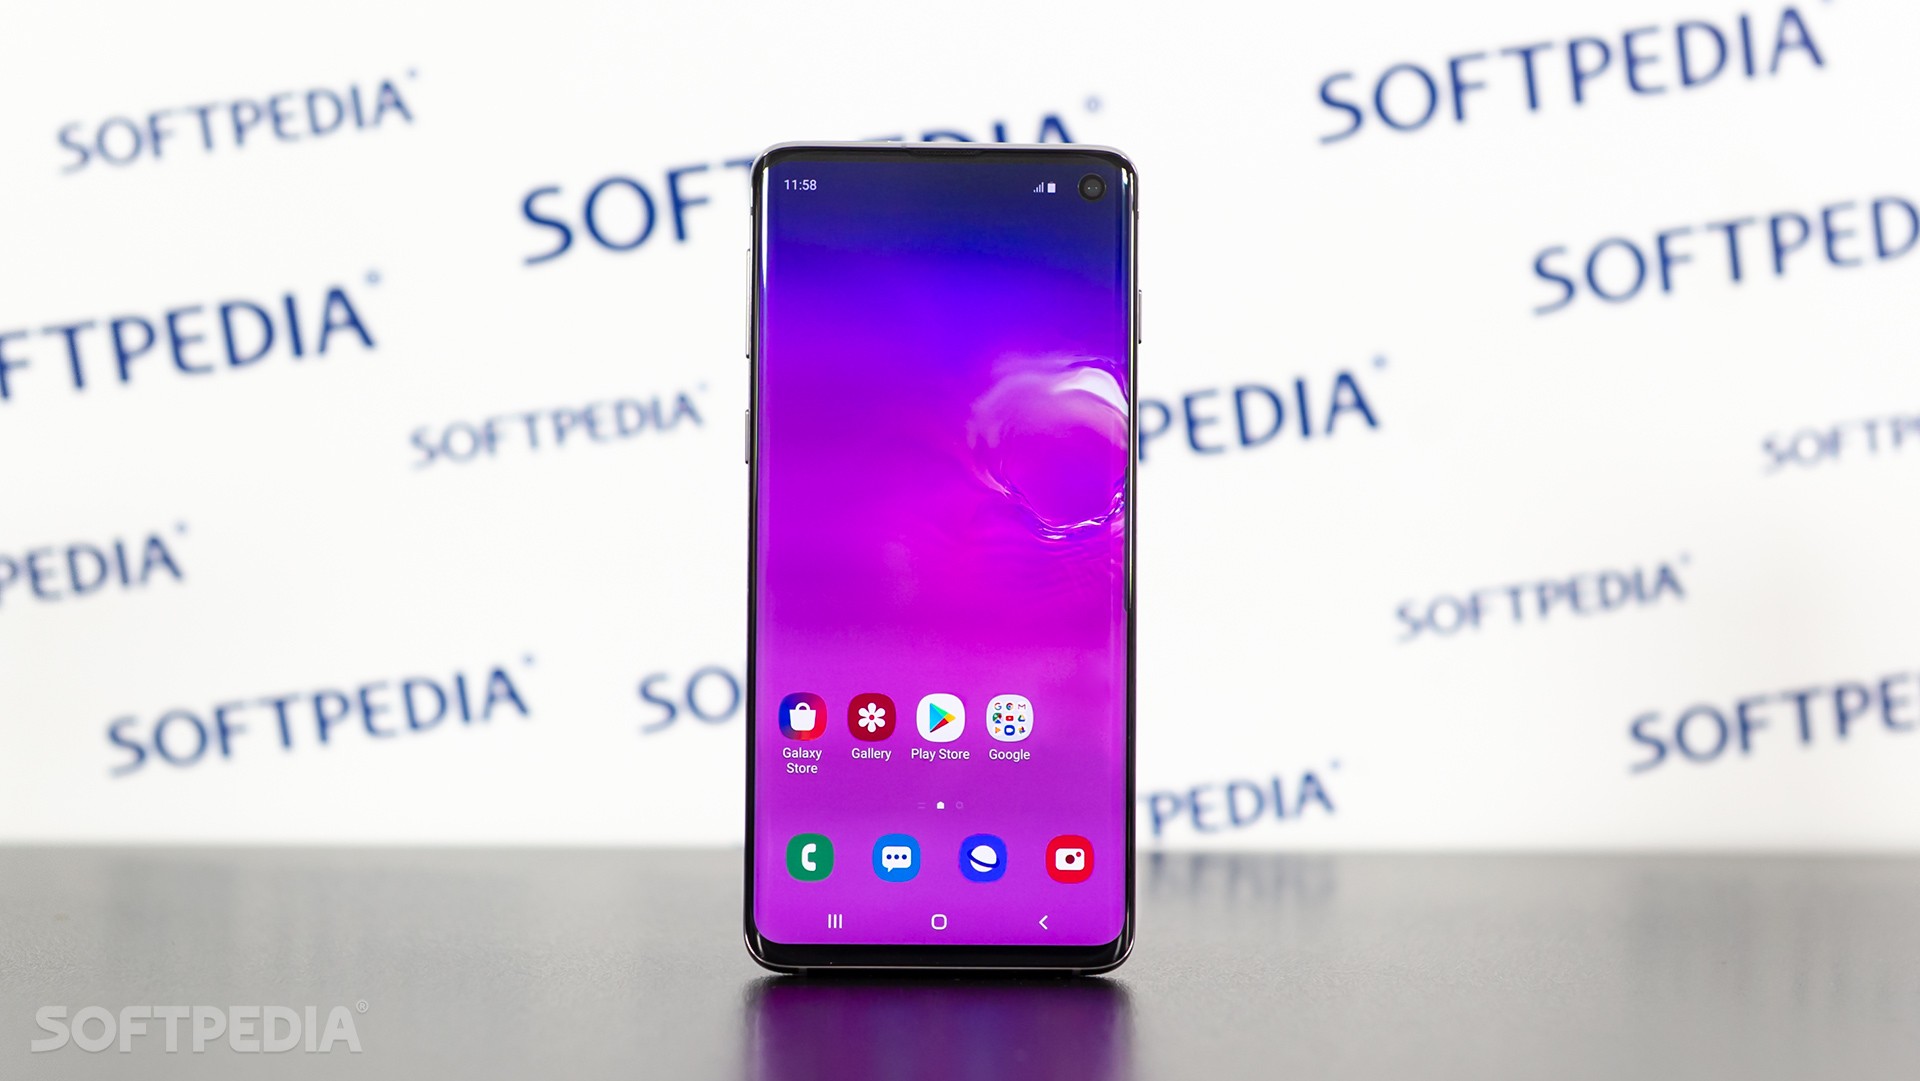 Top apple analyst says samsung s galaxy s10 is selling better than anticipated 525217 2